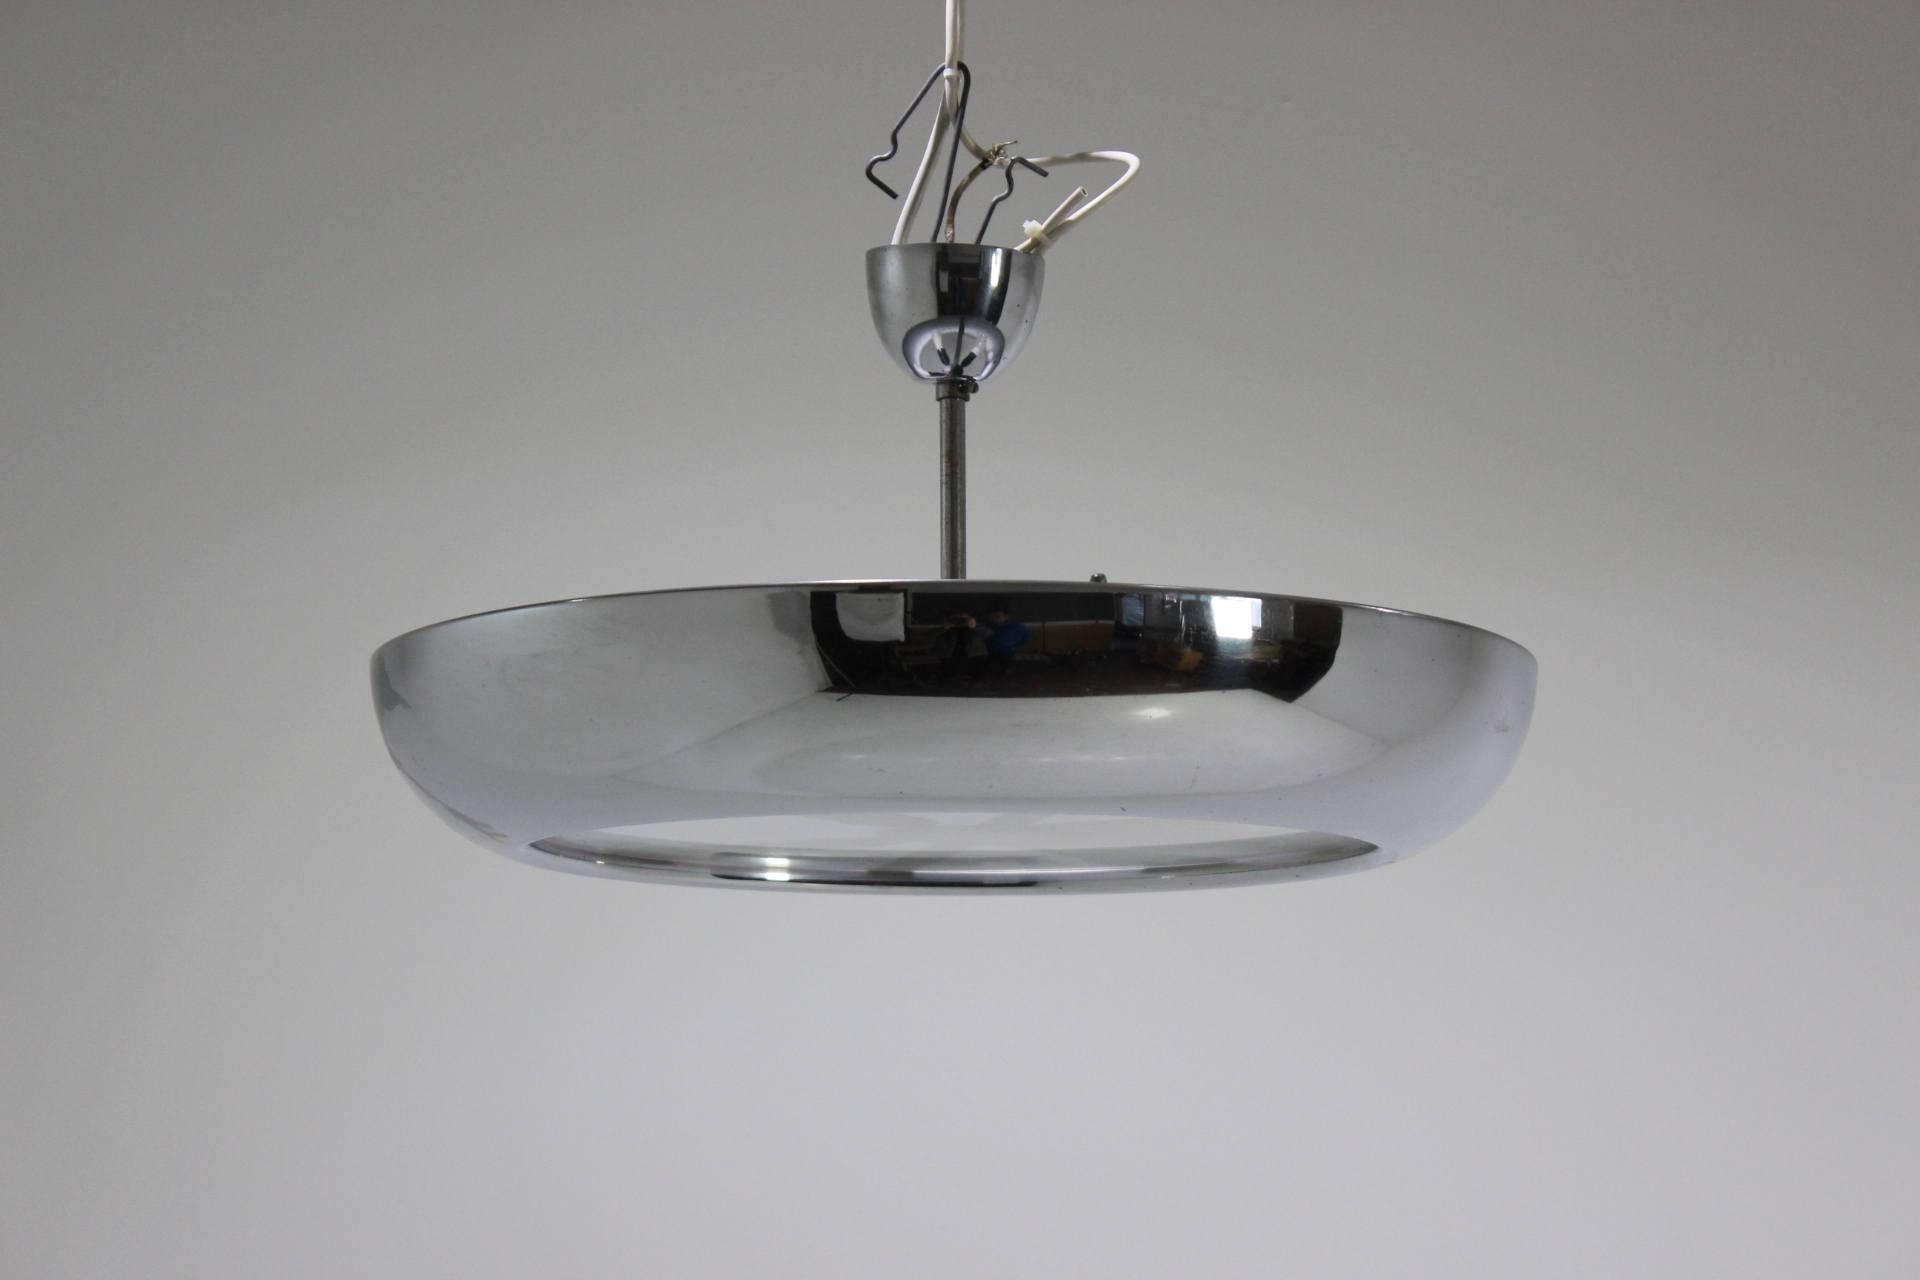 Chrome and glass pendant lamp by Josef Hurka for Napako made in Czech Republik.
Pendant lamp has four bakelite E27 lampholders.
The lamp has new wires and is in excellent condition.
The short rod could be easily replaced with longer one.